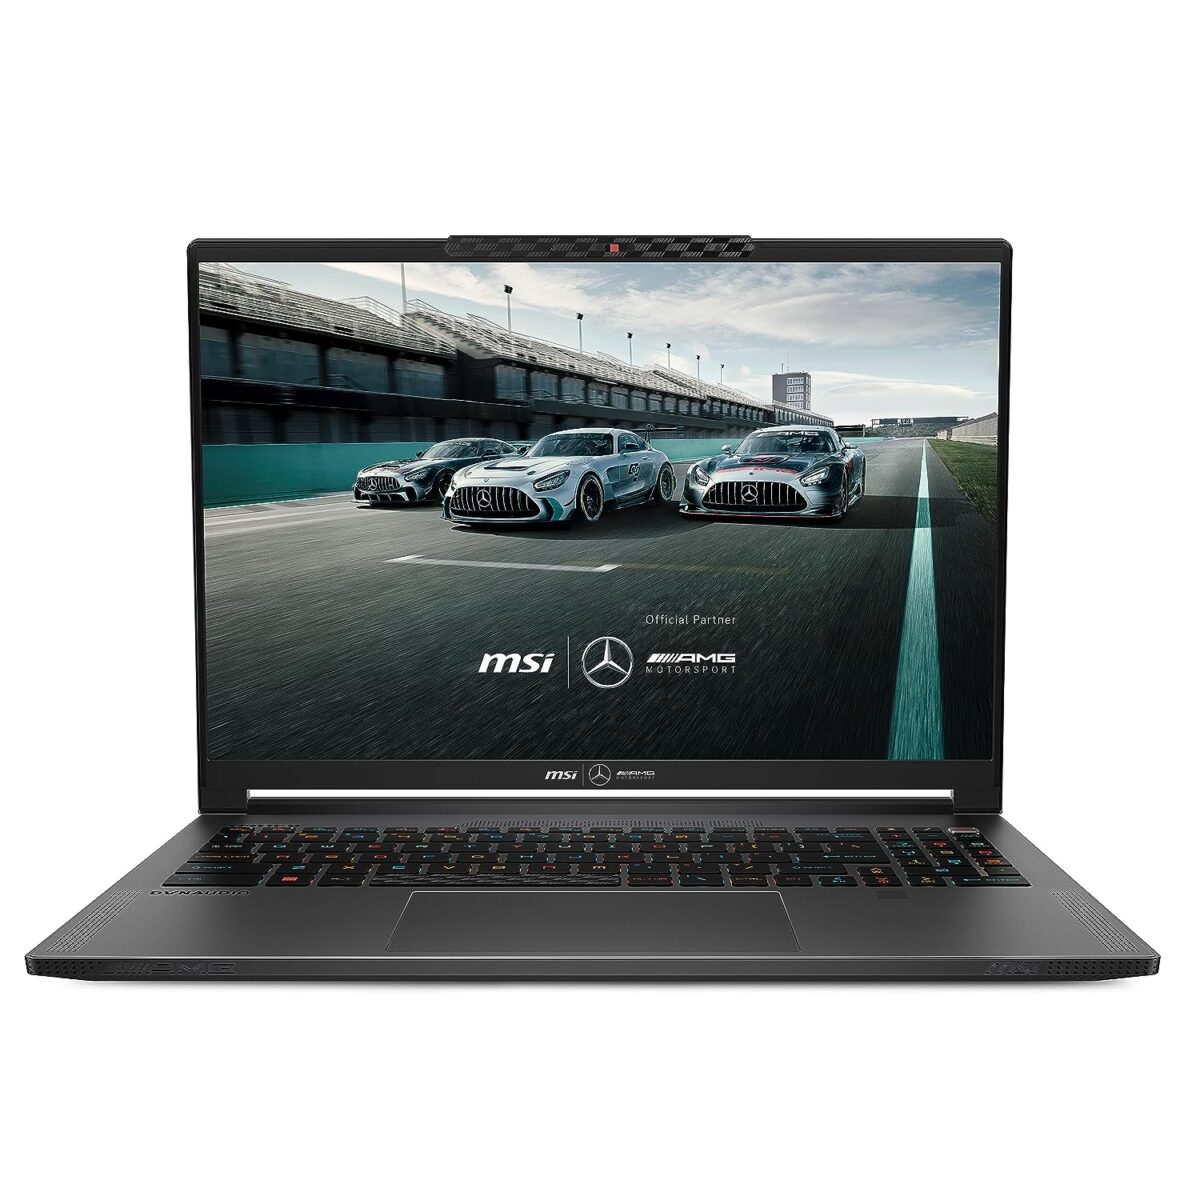 MSI Stealth 16 Mercedes-AMG Laptops launched in India ( 13th Gen Intel Core i9-13900H )